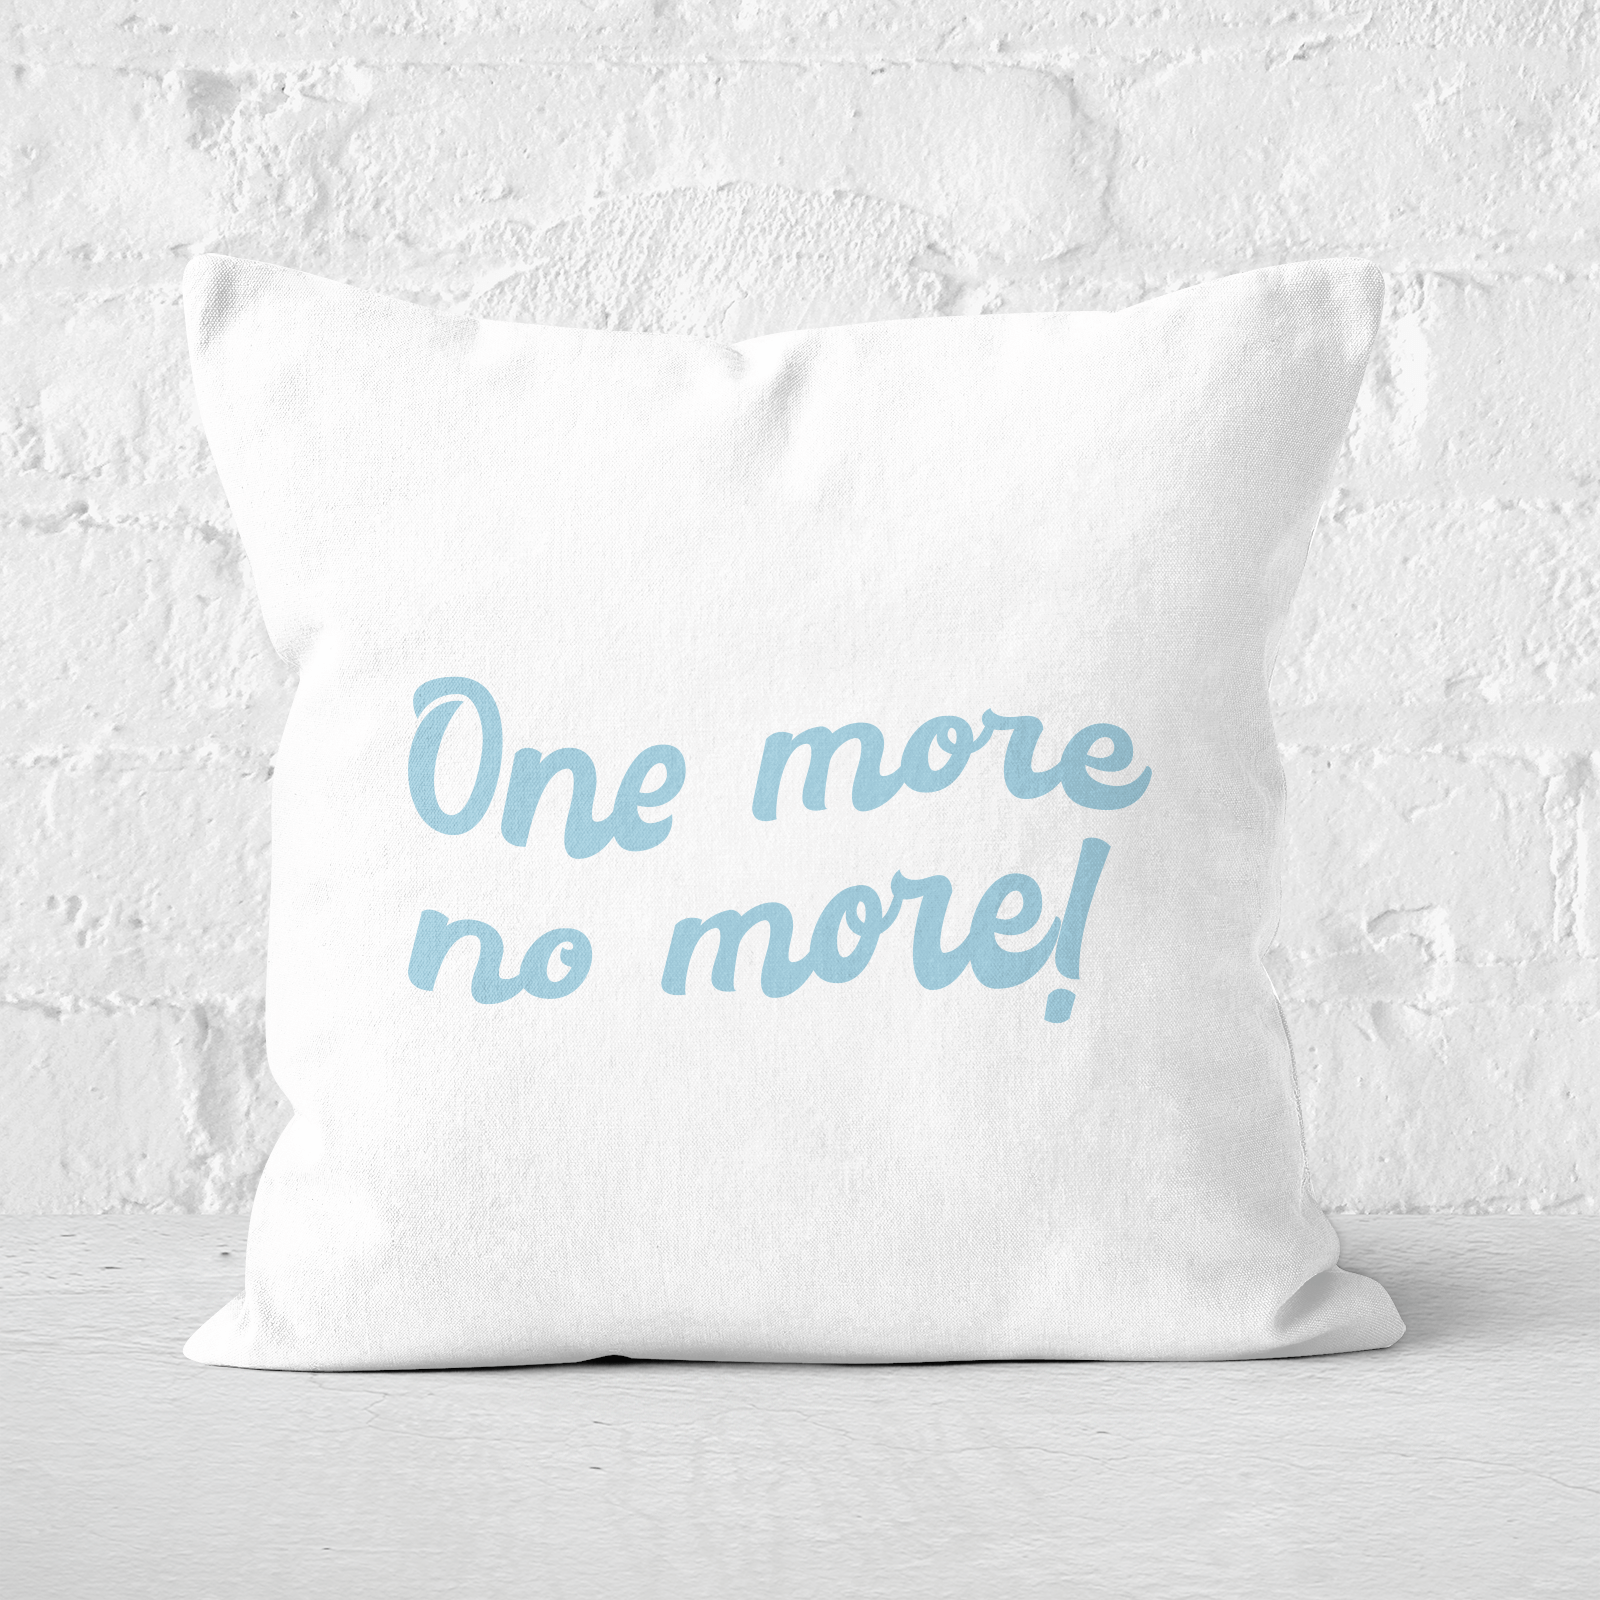 One More No More! Square Cushion - 60x60cm - Soft Touch